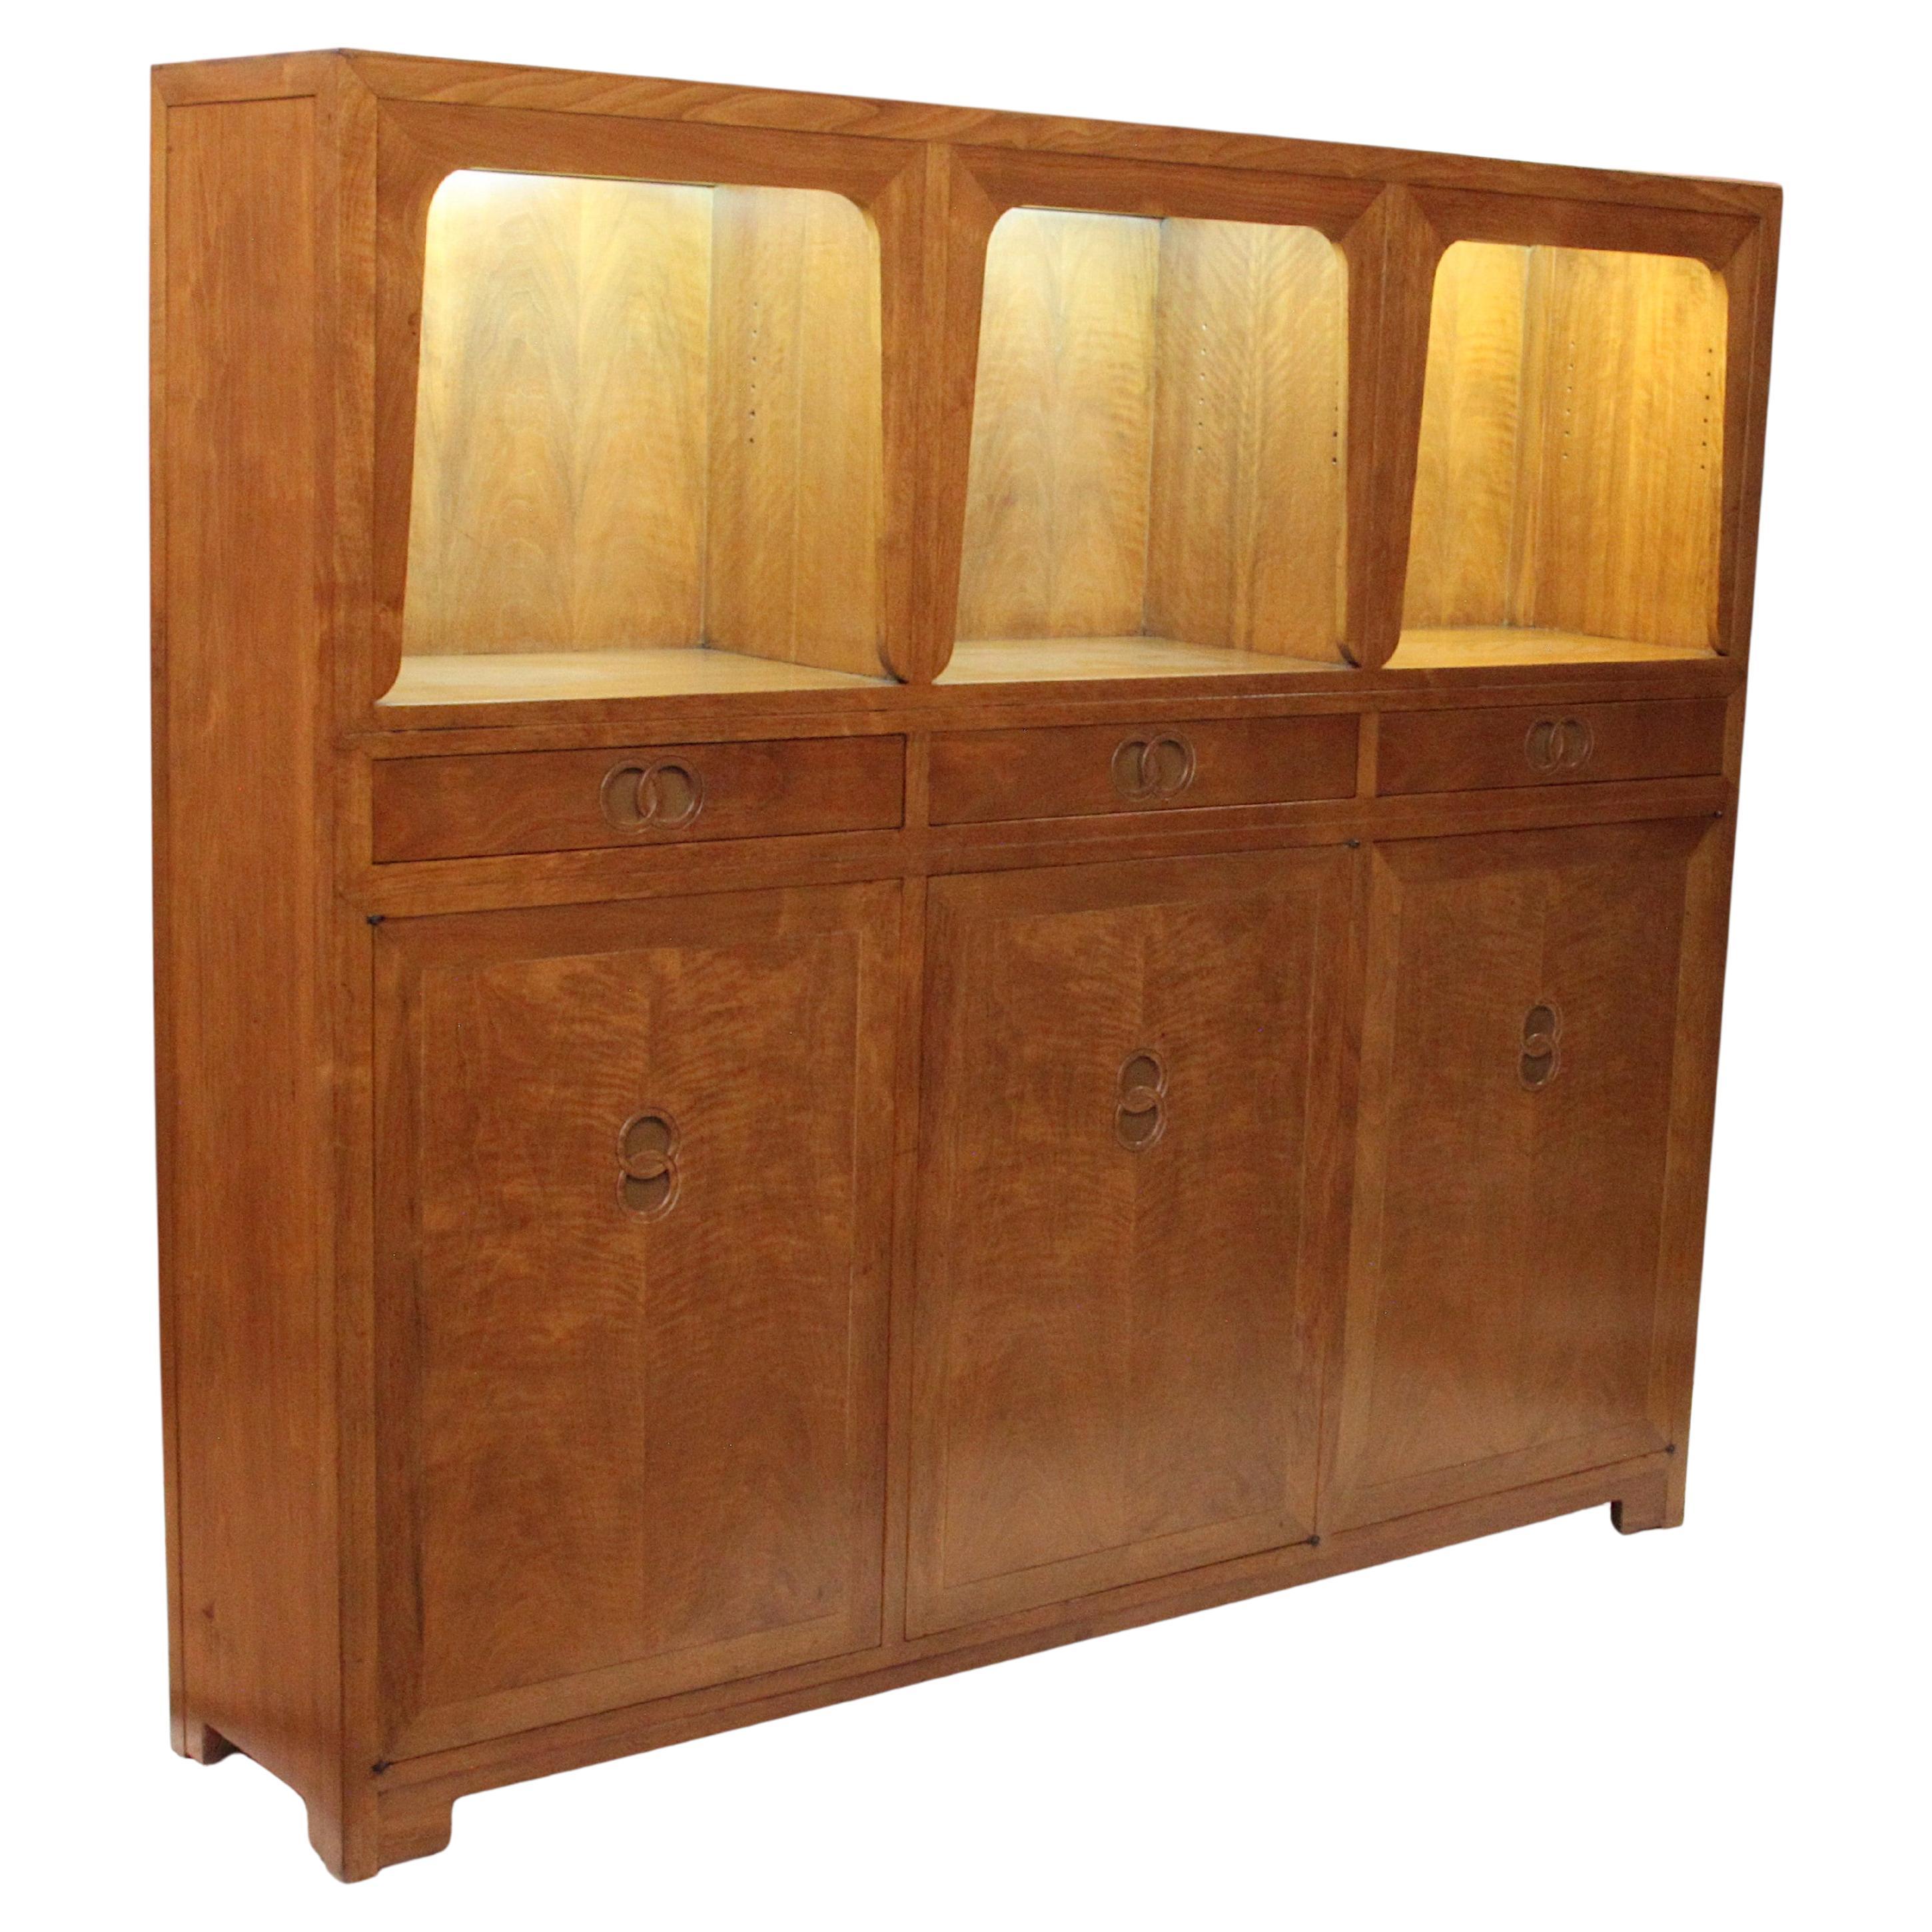 Mid-Century Modern Bookcase Display Case Cabinet by Michael Taylor for Baker